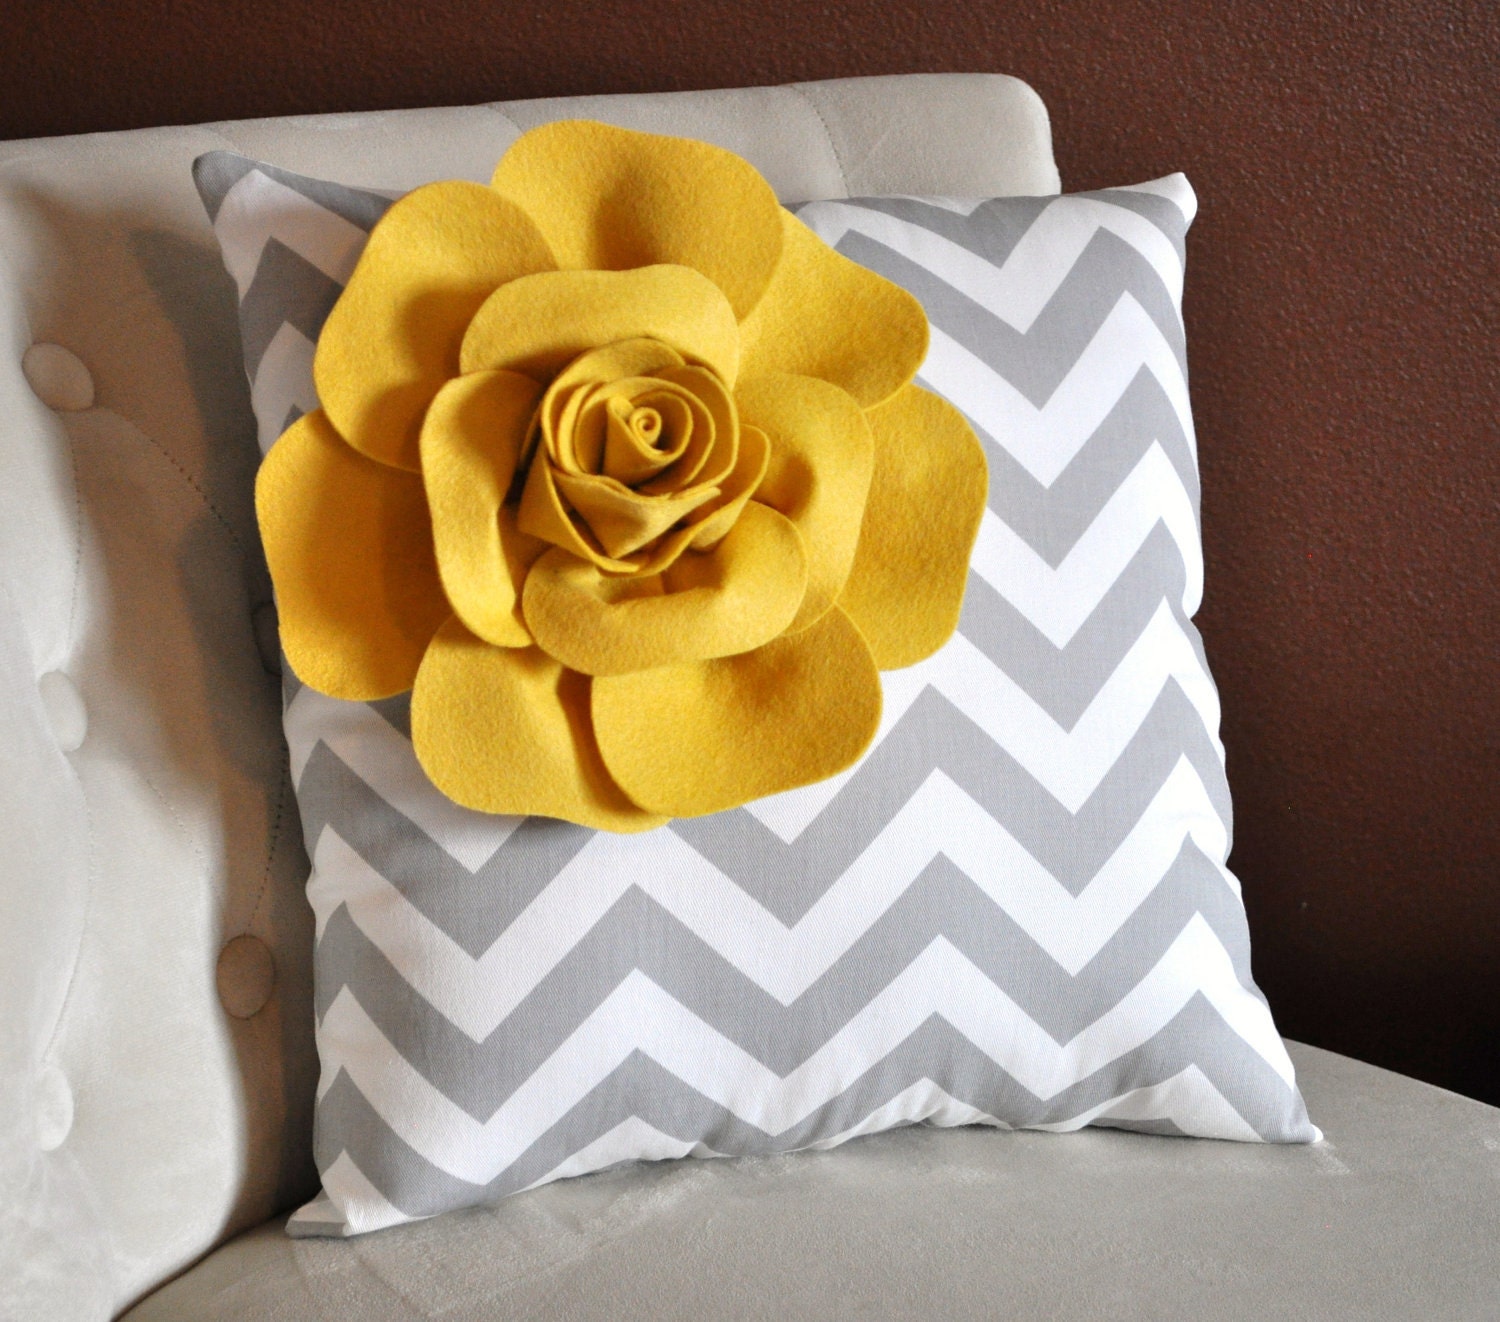 Chevron Pillow with Flower